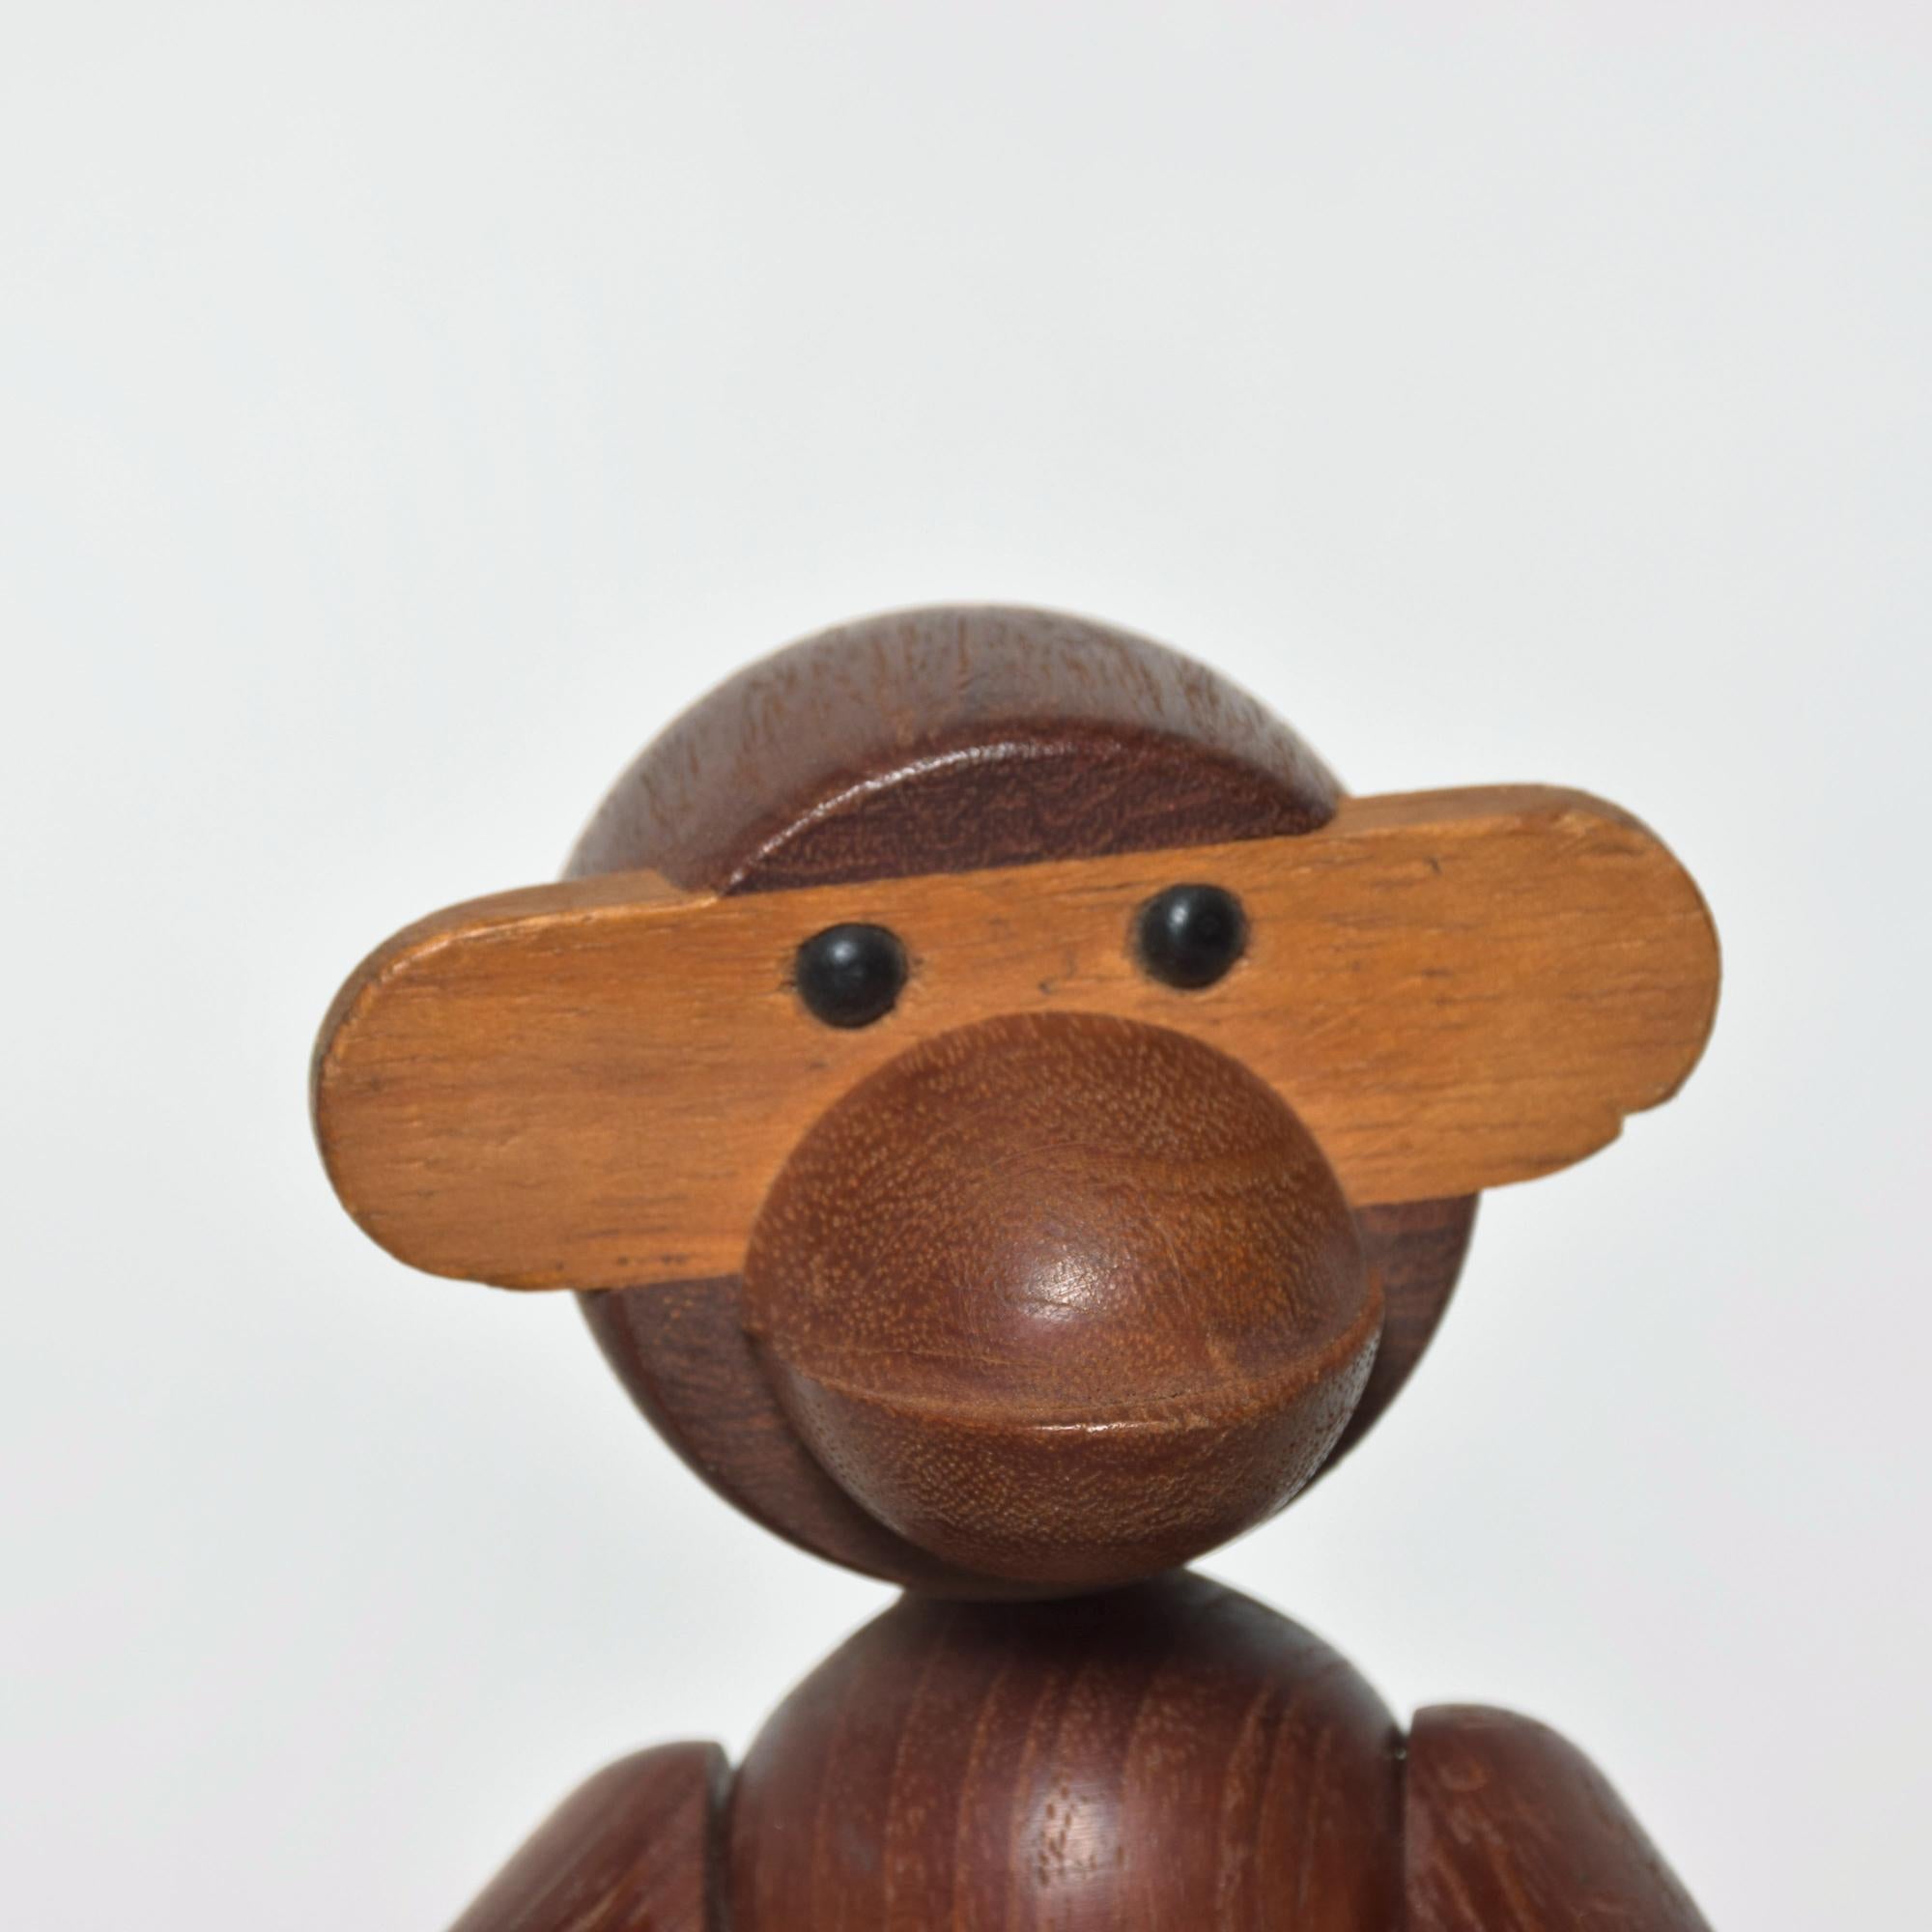 Kay Bojesen charming vintage Mid-Century Modern teak wood an adorable monkey toy flexible figurine Denmark 1960s vintage
Teak and blonde wood materials. Stamped by Maker.
Original vintage condition unrestored preowned presentation. Small nick at